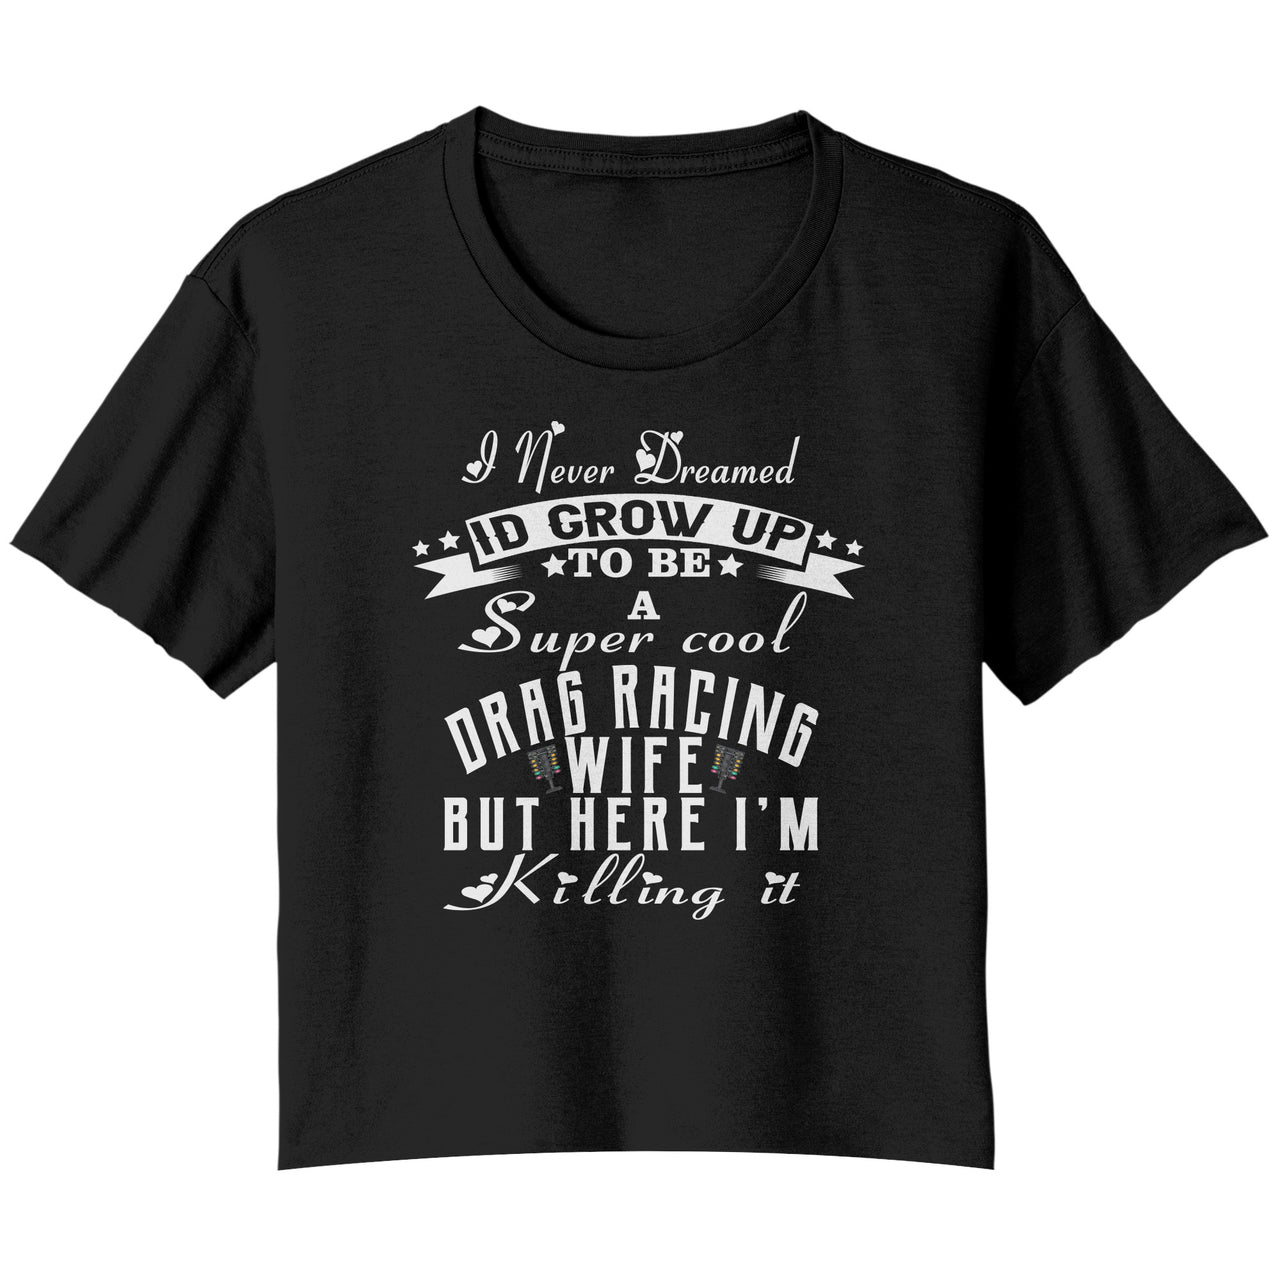 I Never Dreamed I'd Grow Up To Be A Super Cool Drag Racing Wife But Here I'm Killing It T-Shirts